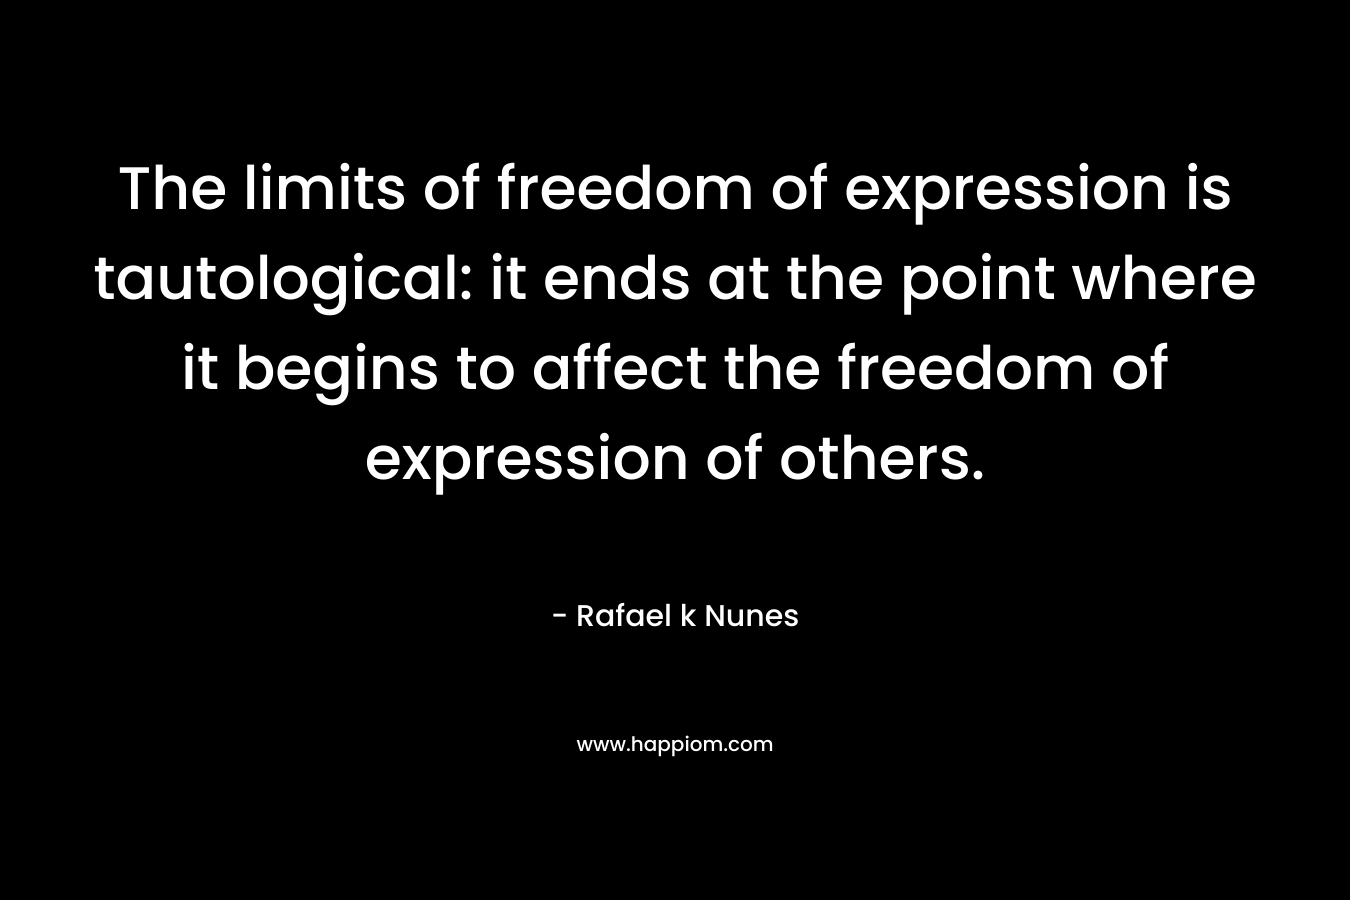 The limits of freedom of expression is tautological: it ends at the point where it begins to affect the freedom of expression of others. – Rafael k Nunes